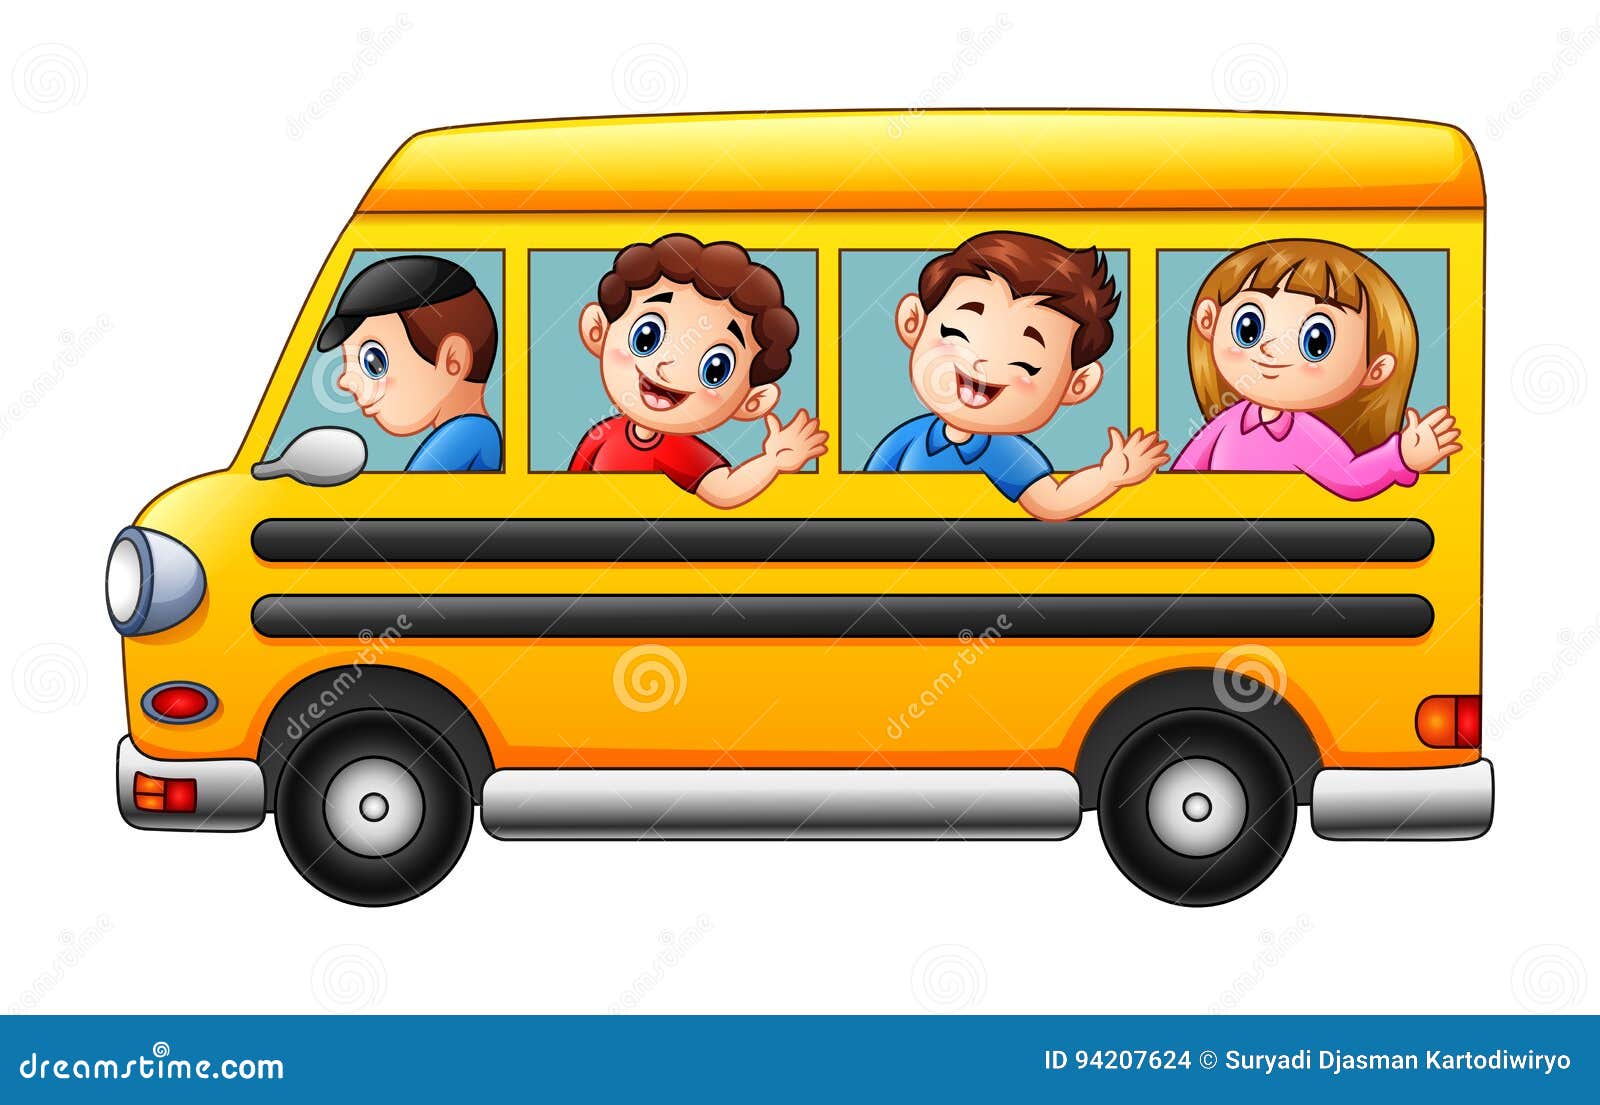 Cartoon Kids Going To School by School Bus Stock Vector - Illustration of  riding, male: 94207624